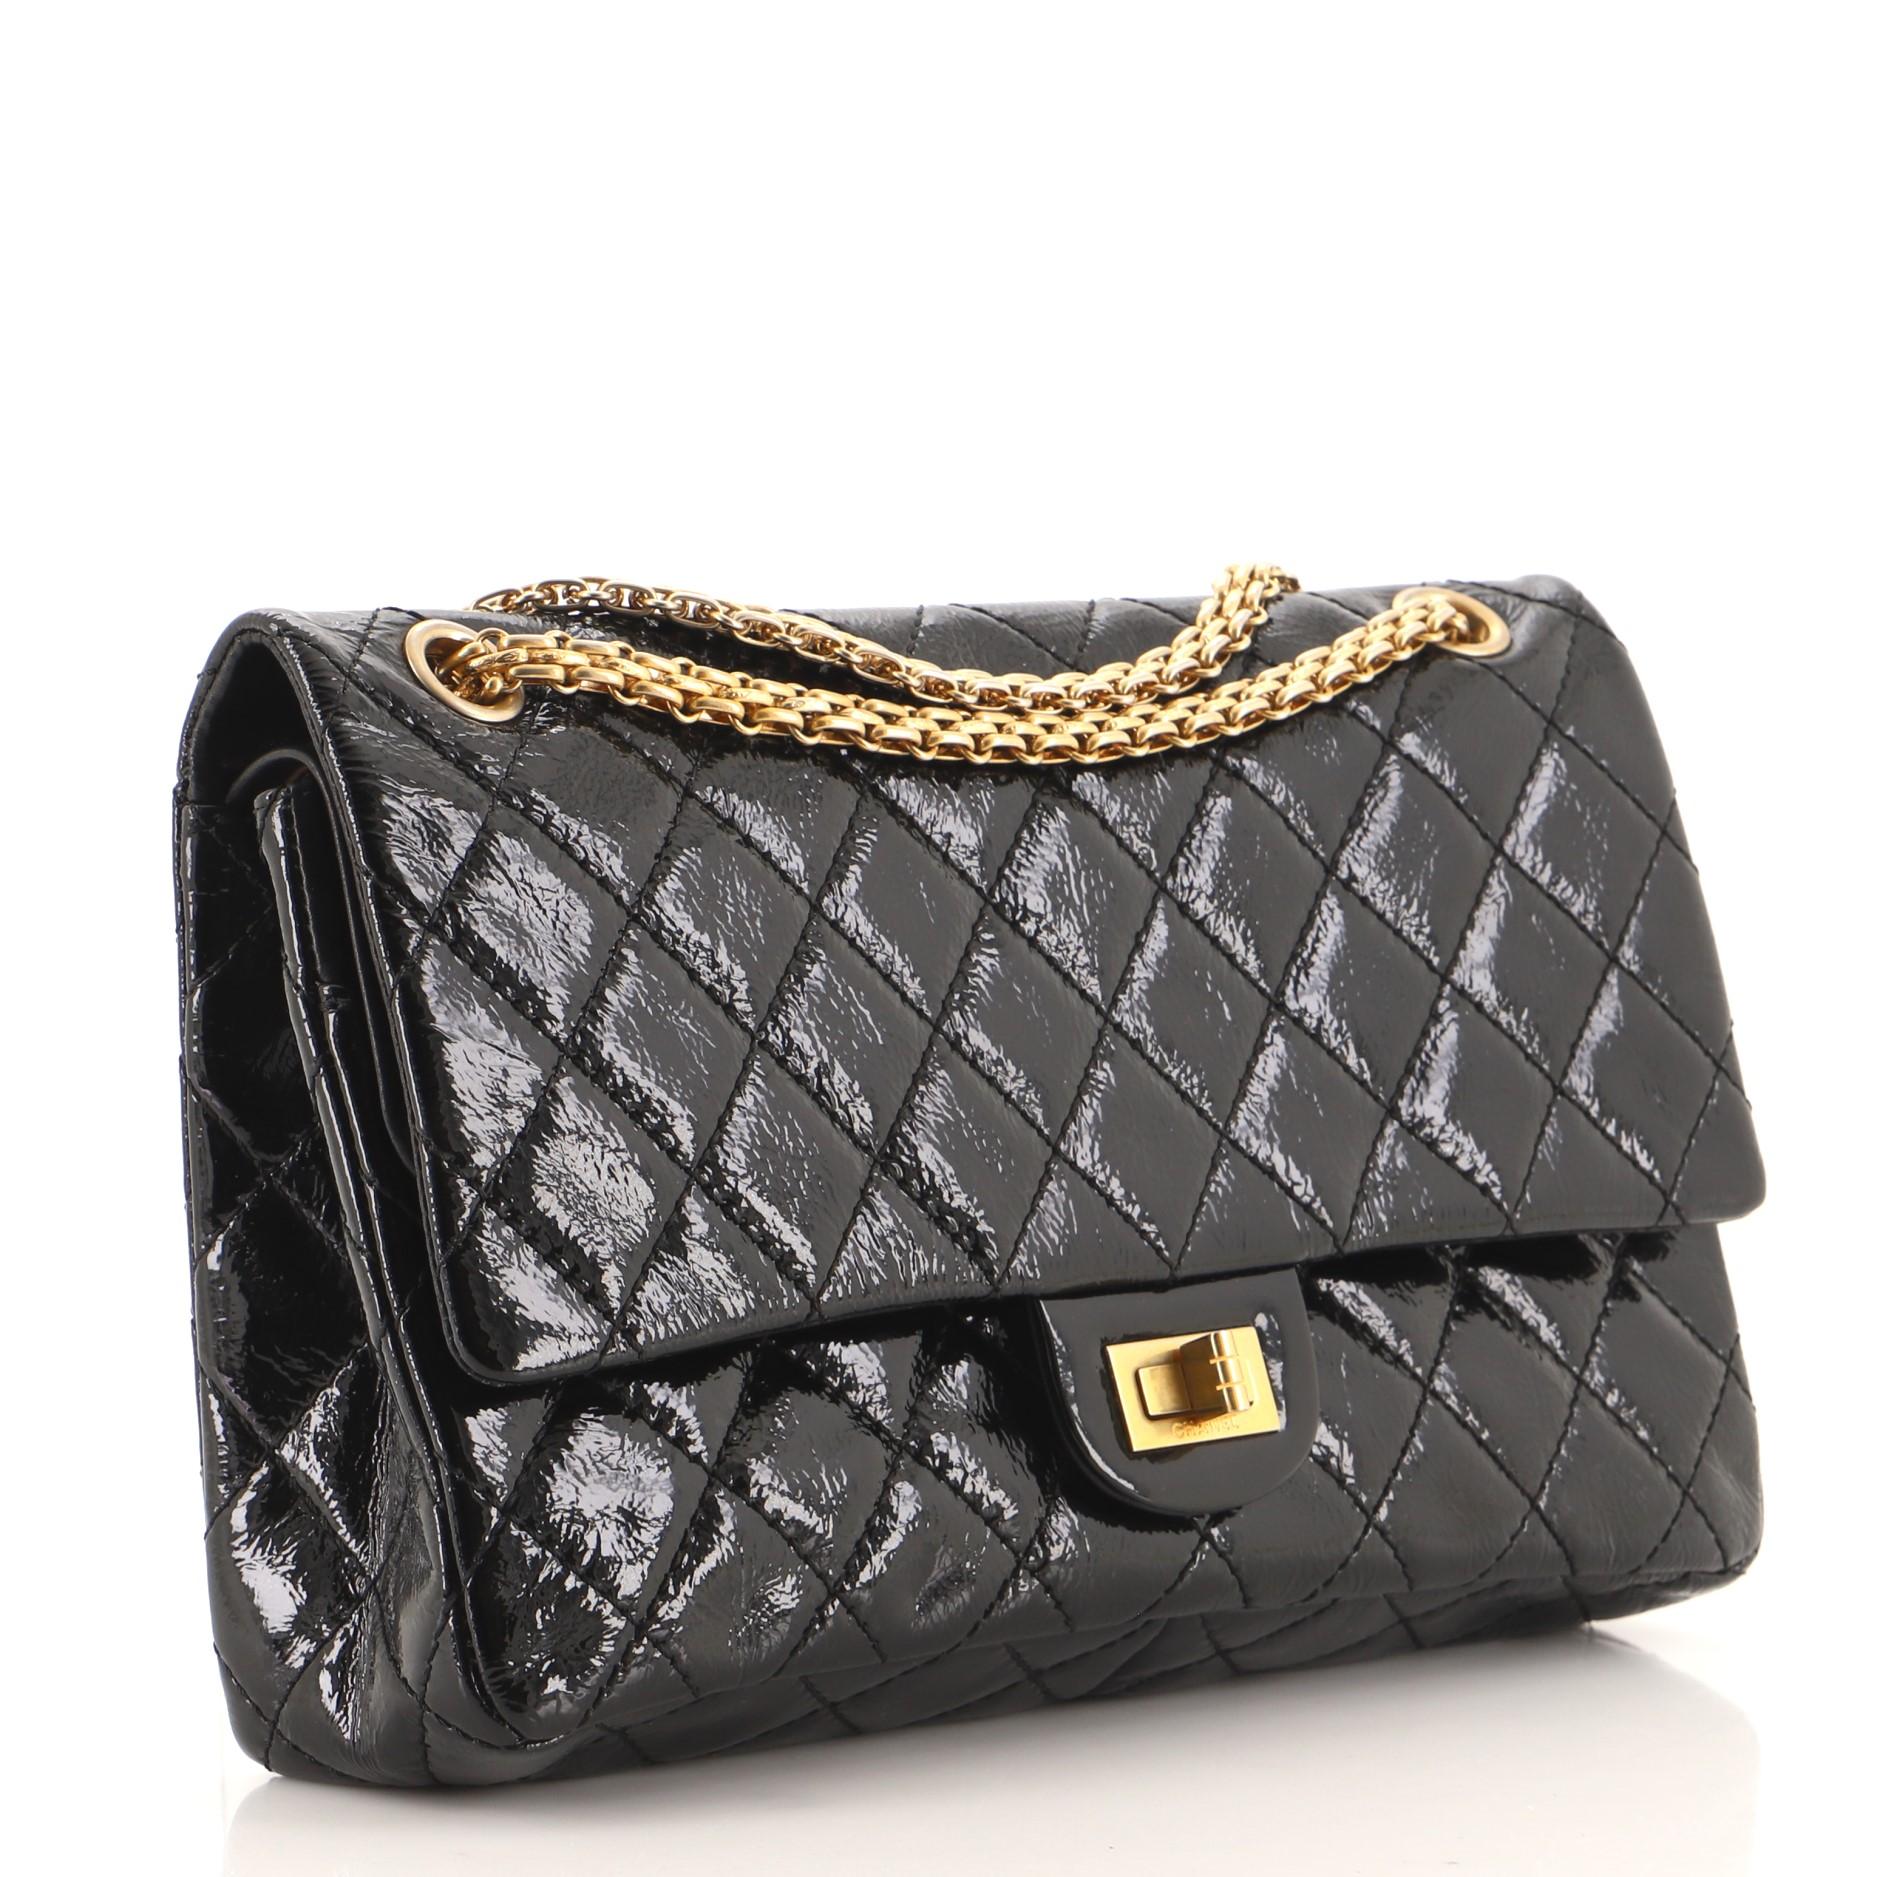 Black Chanel Reissue 2.55 Flap Bag Quilted Crinkled Patent 226